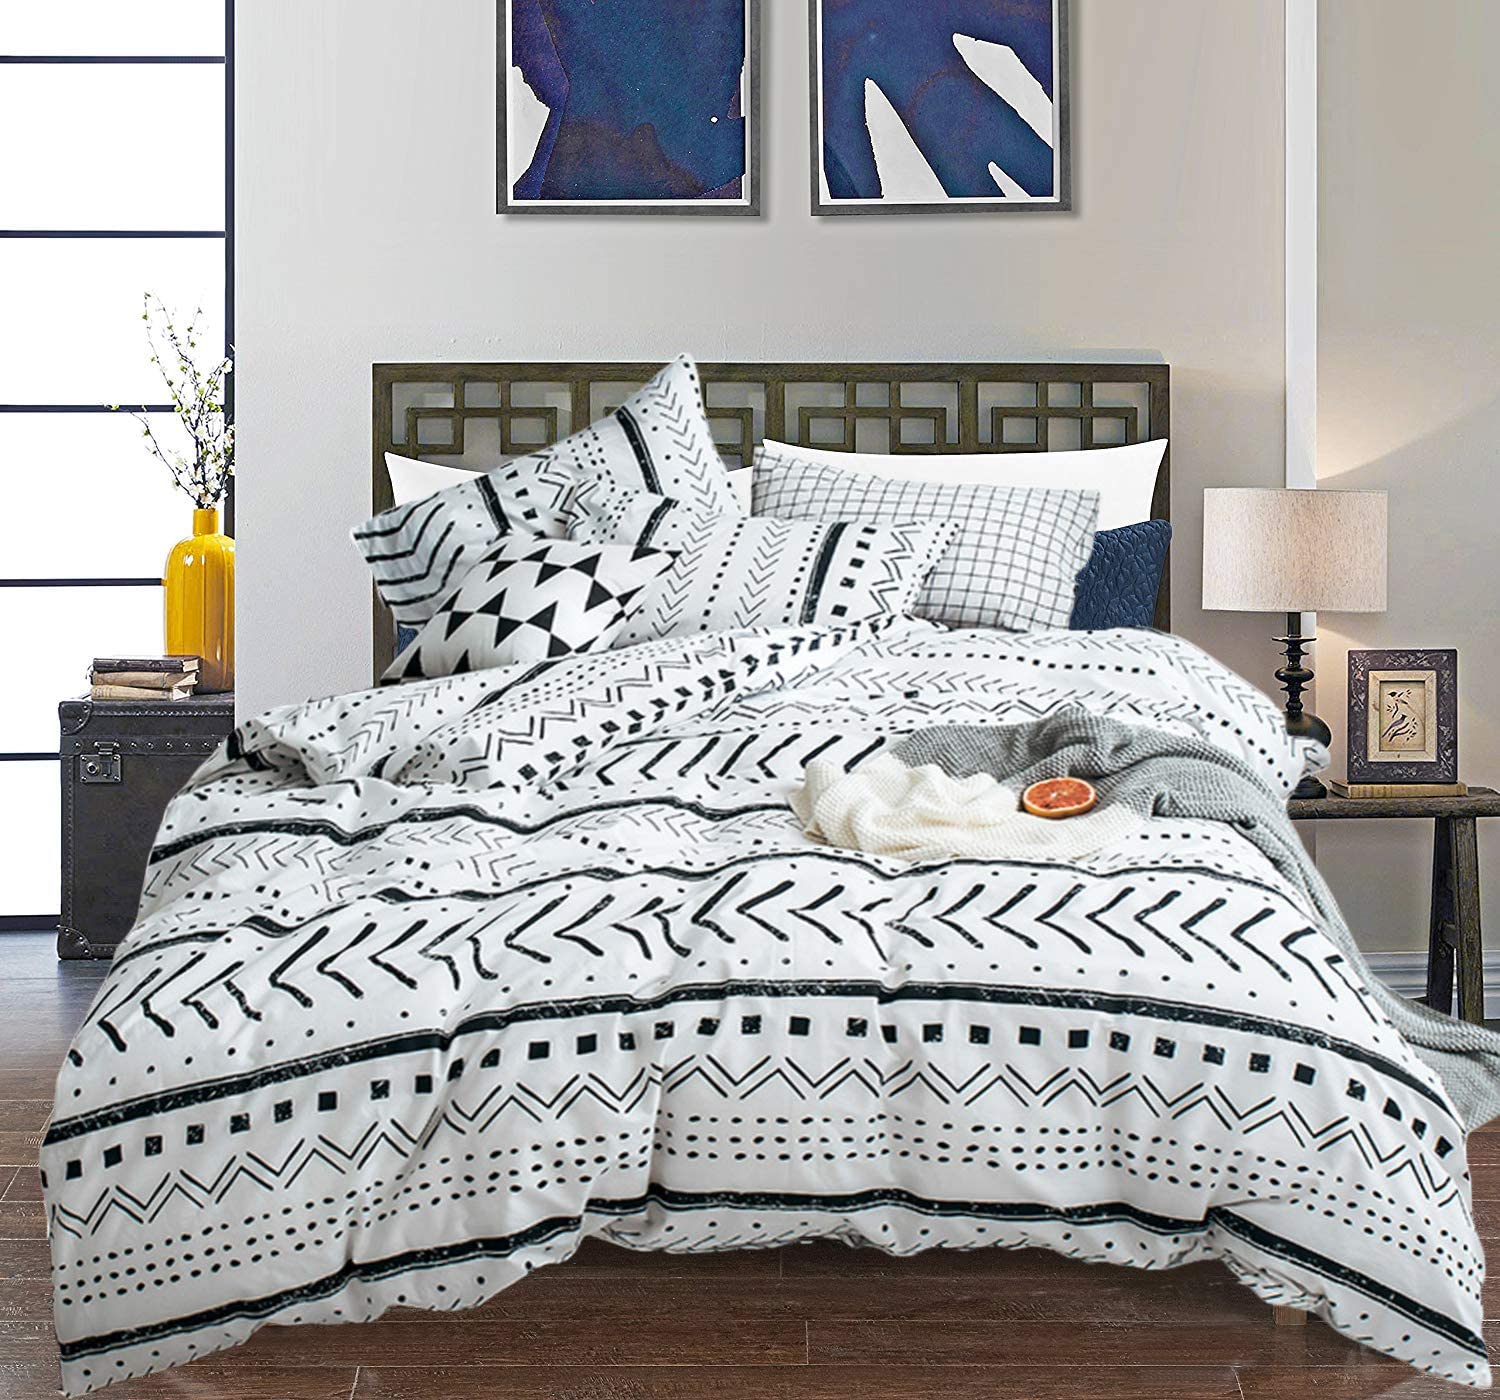 Queen Aztec Bedding Comforter Sets, Black And White Twin Bed Comforter Sets